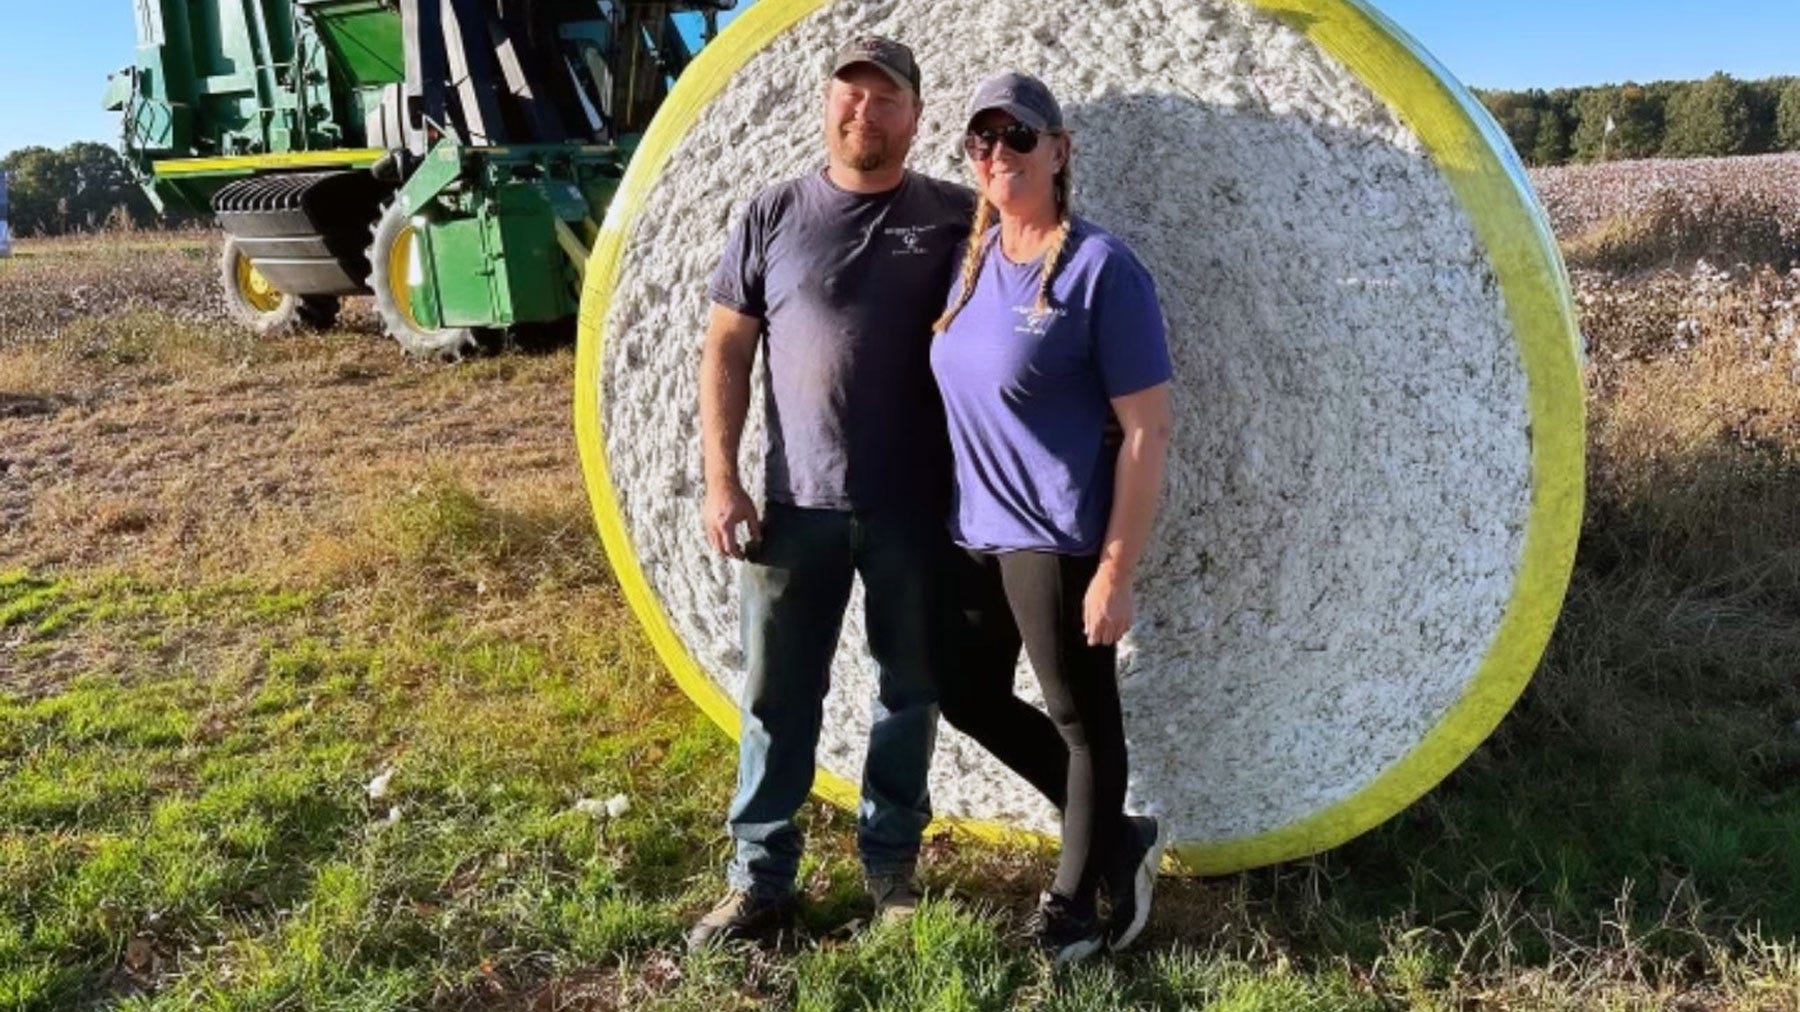 Man and woman farmers standing together in front of a cotton bale wrapped in yellow wrap with cotton picker in background.